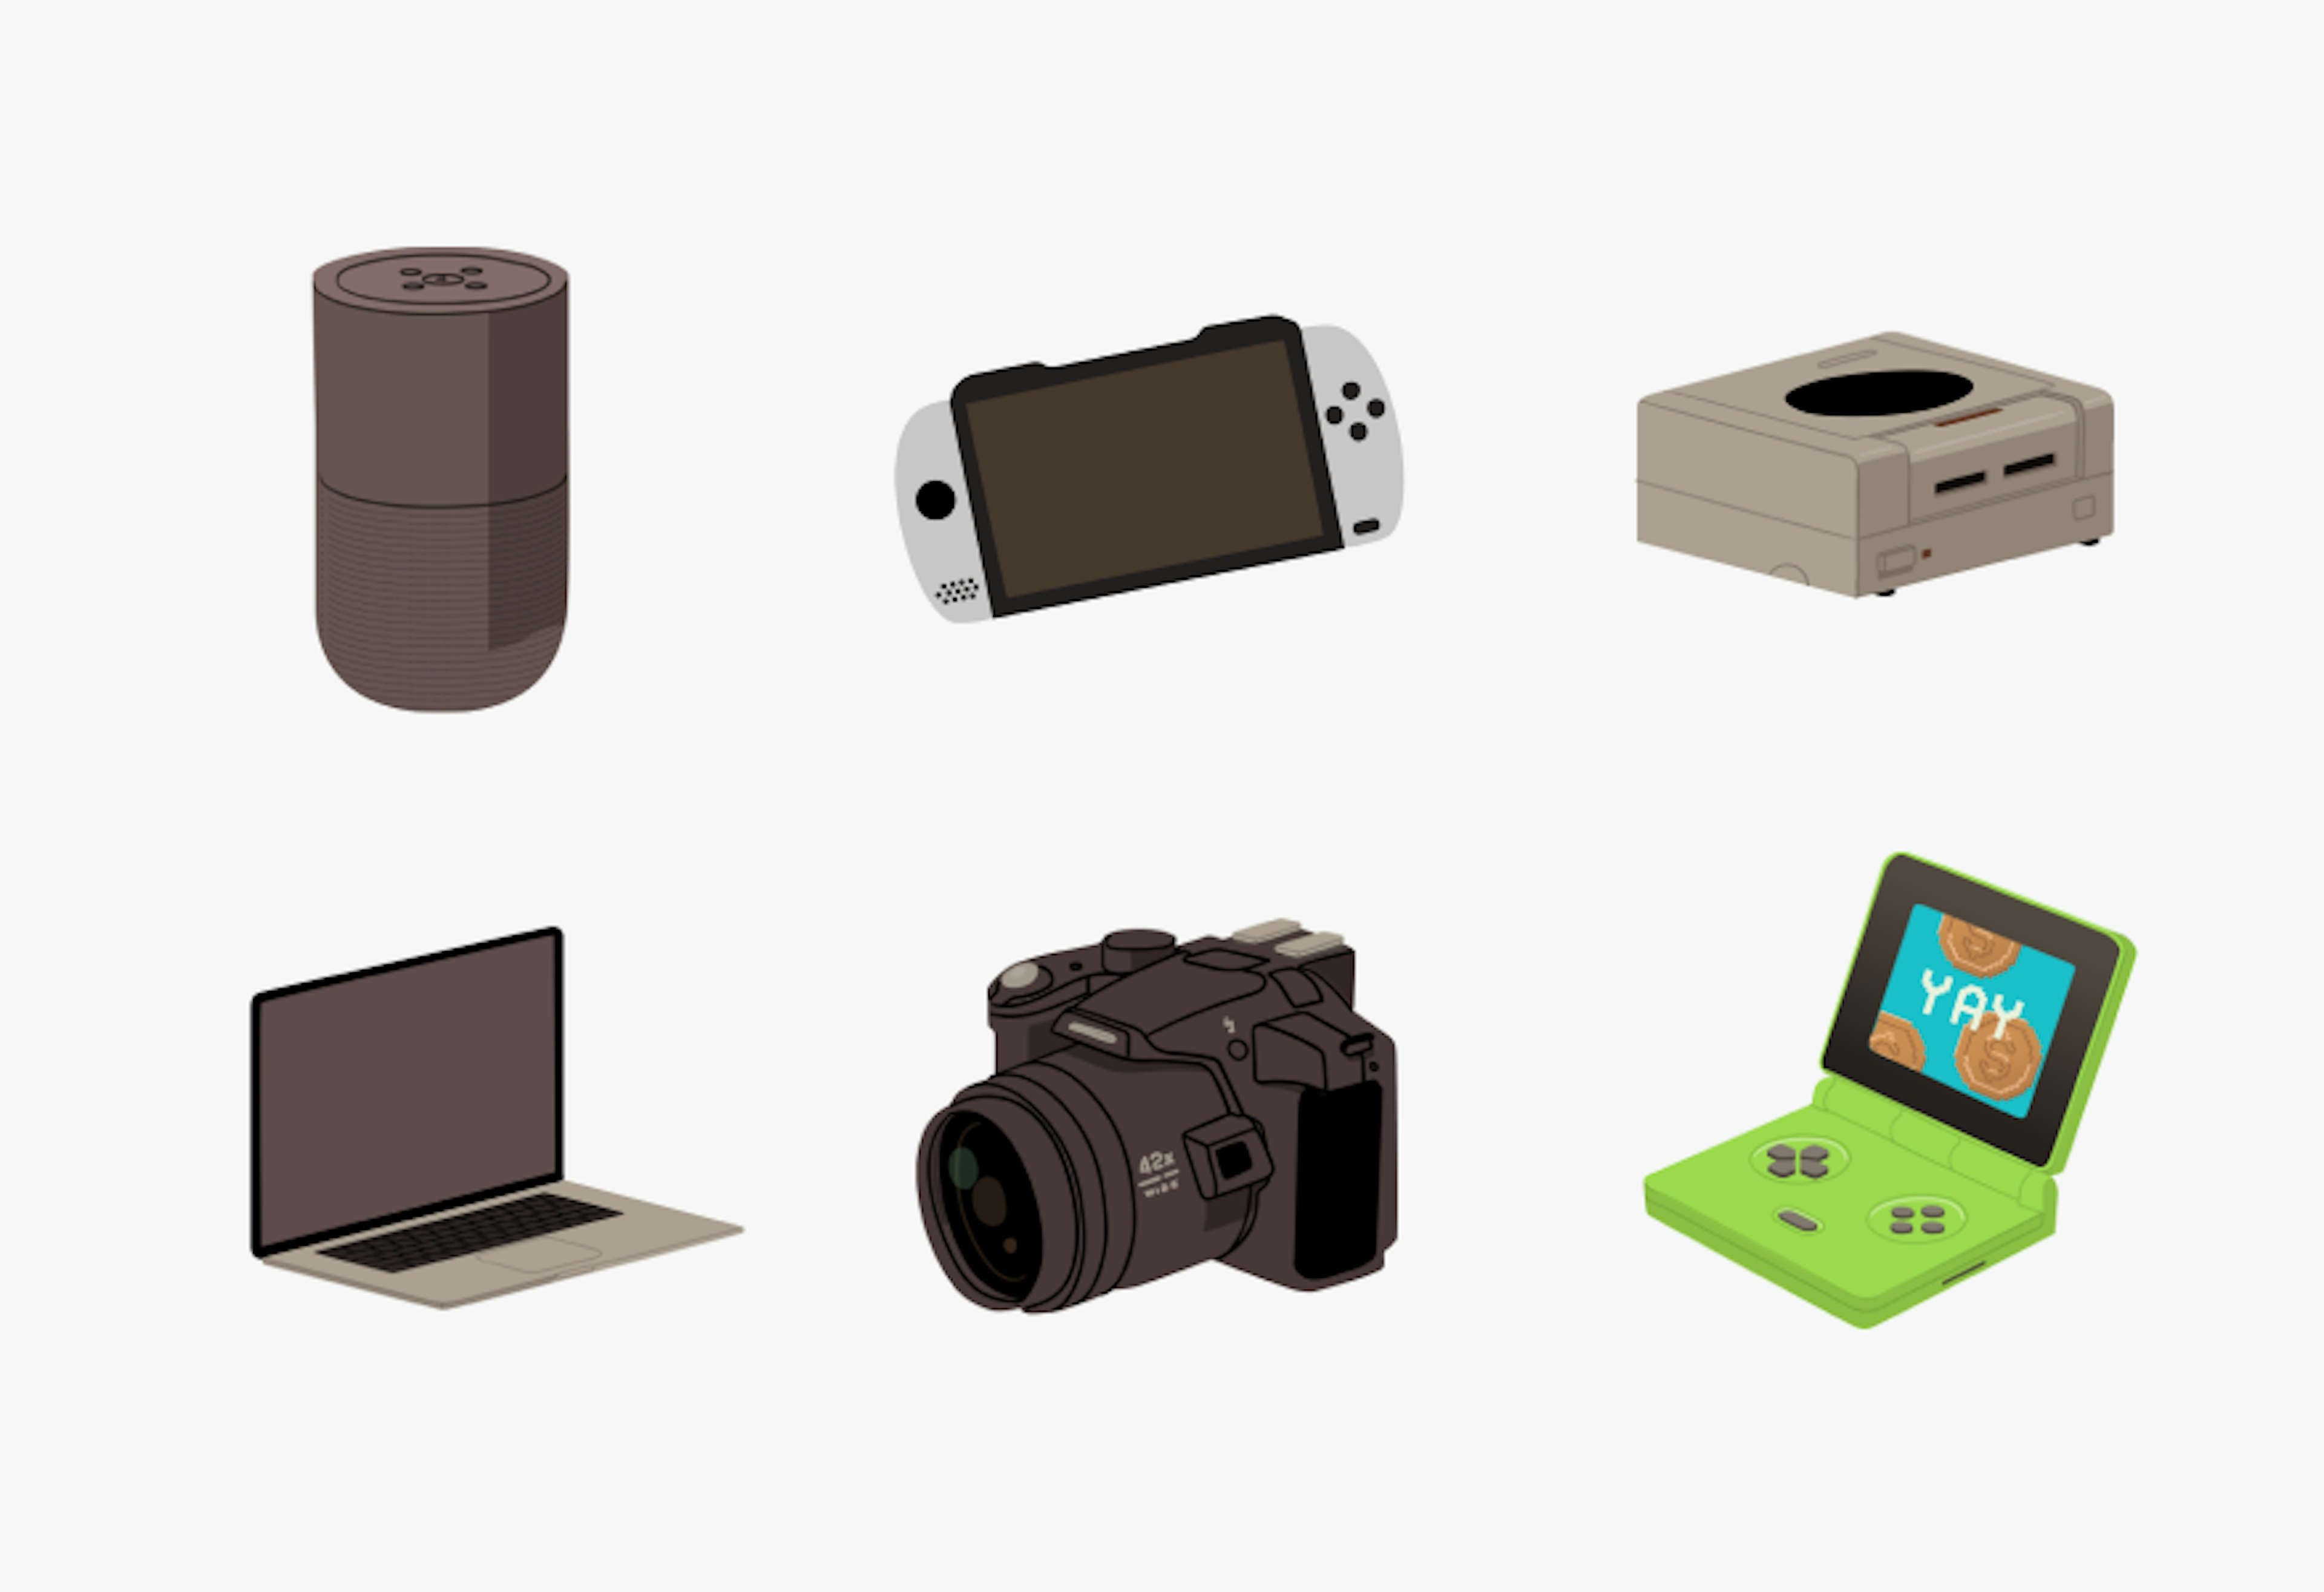 6 distinct illustrations highlighting the electronics category:
A smart speaker.
A handheld gaming console.
A retro gaming console.
A laptop.
A digital camera.
A green handheld gaming device with a screen displaying "YAY" and pixelated coins.